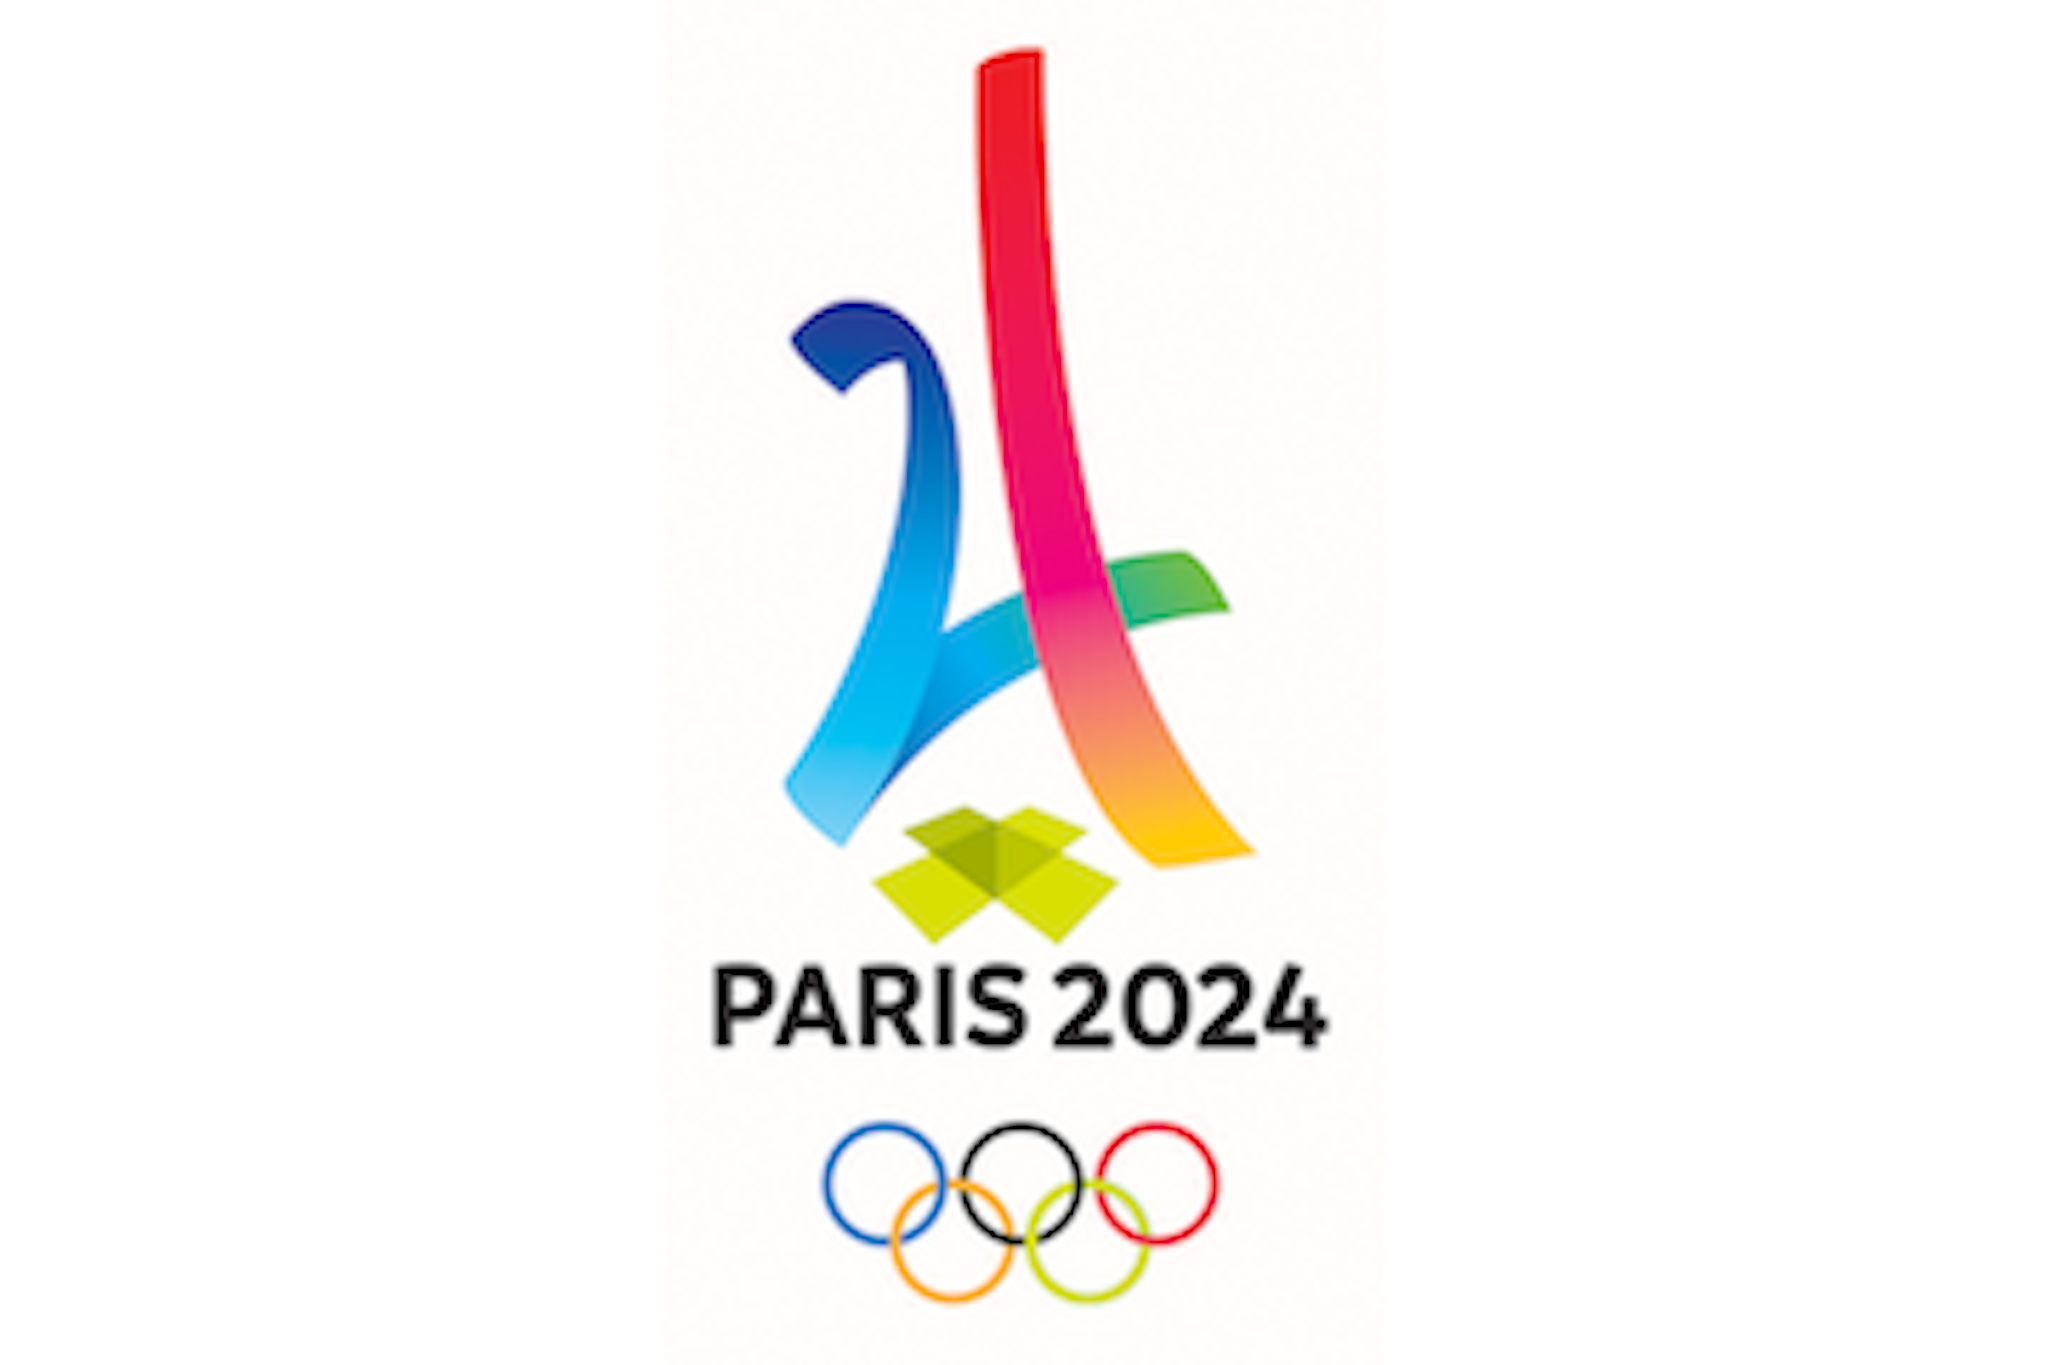 Digital transparency of the Paris 2024 Olympics contracts to build